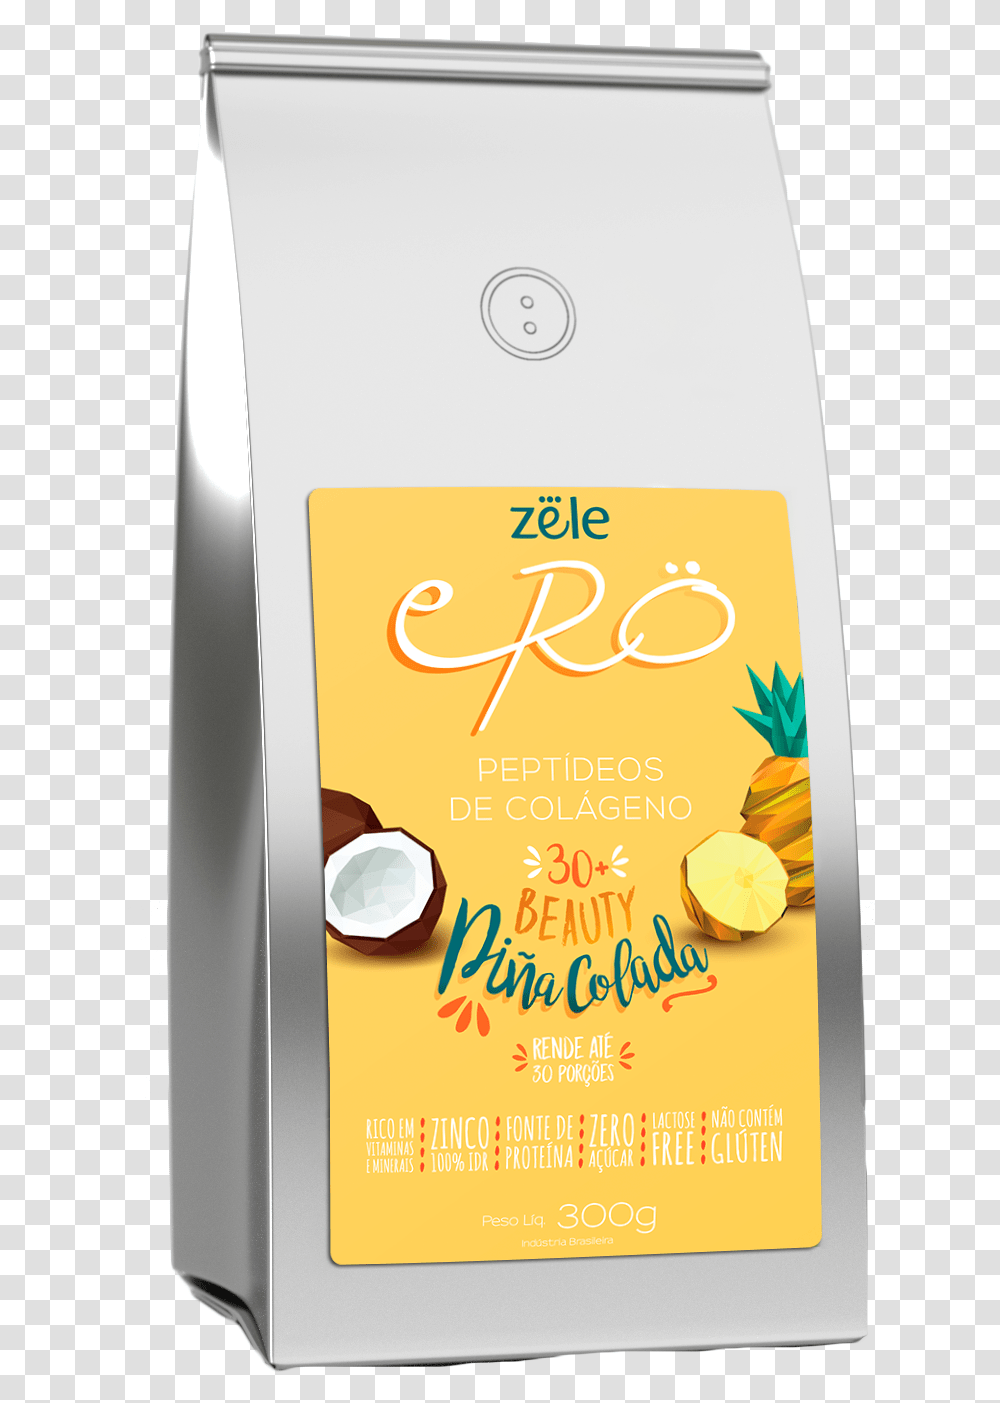 Colgeno Abacaxi Coco Pinacolada Peptdeos Hair, Advertisement, Poster, Flyer, Paper Transparent Png